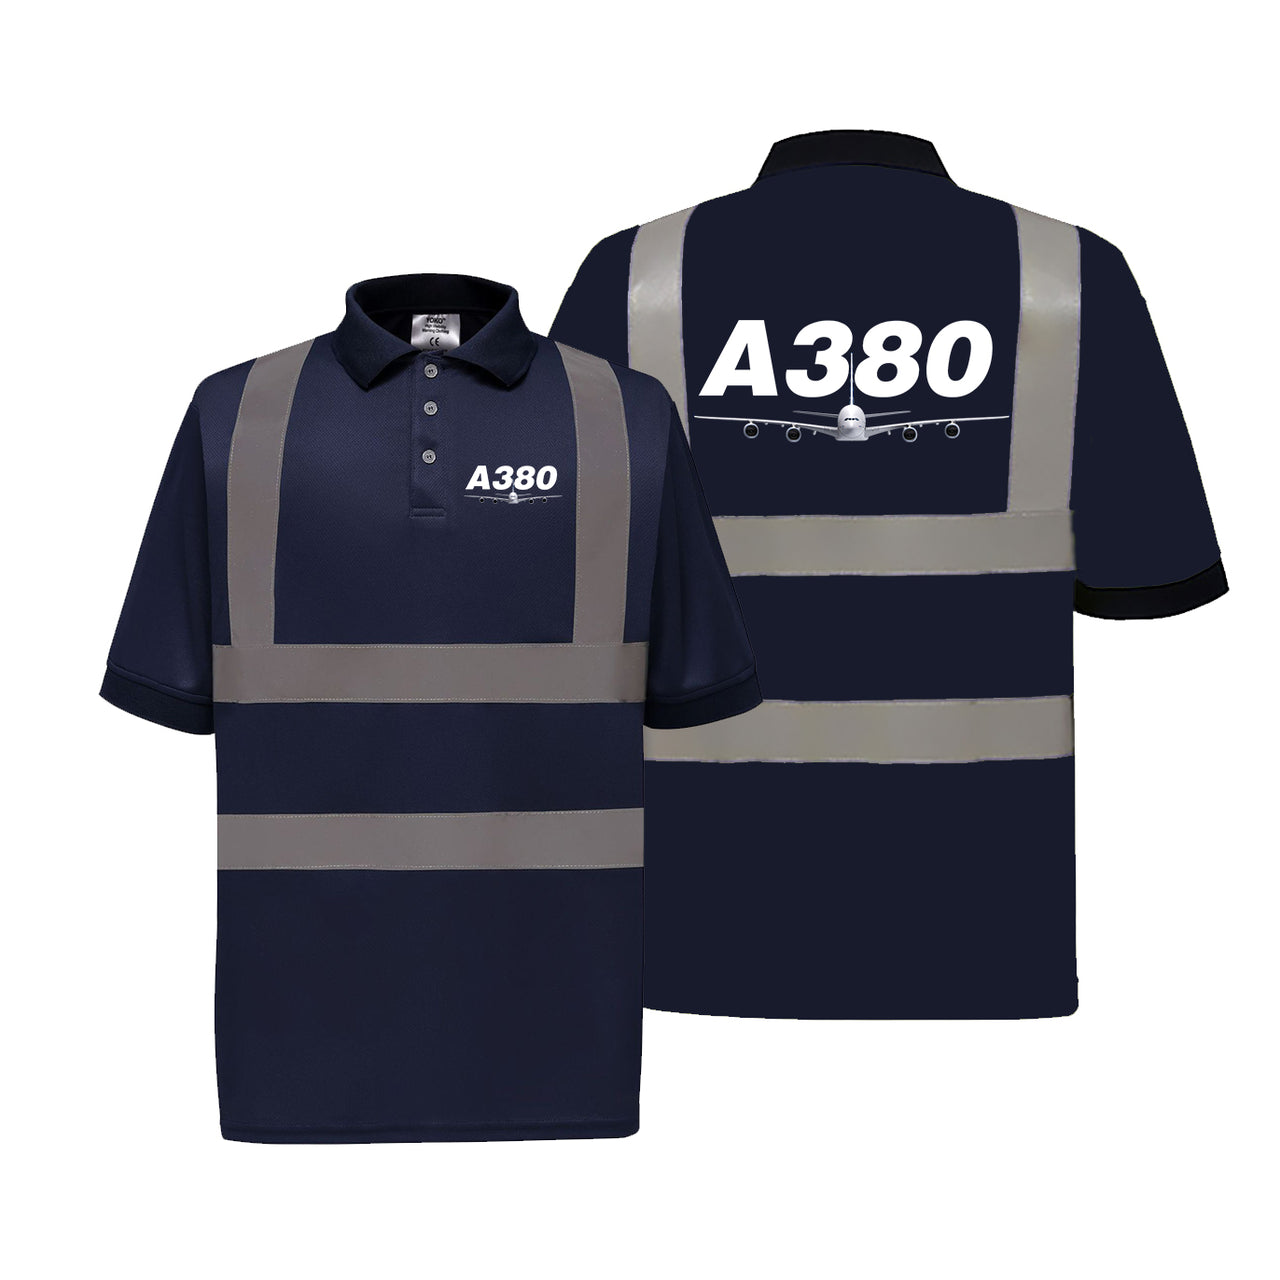 Super Airbus A380 Designed Reflective Polo T-Shirts